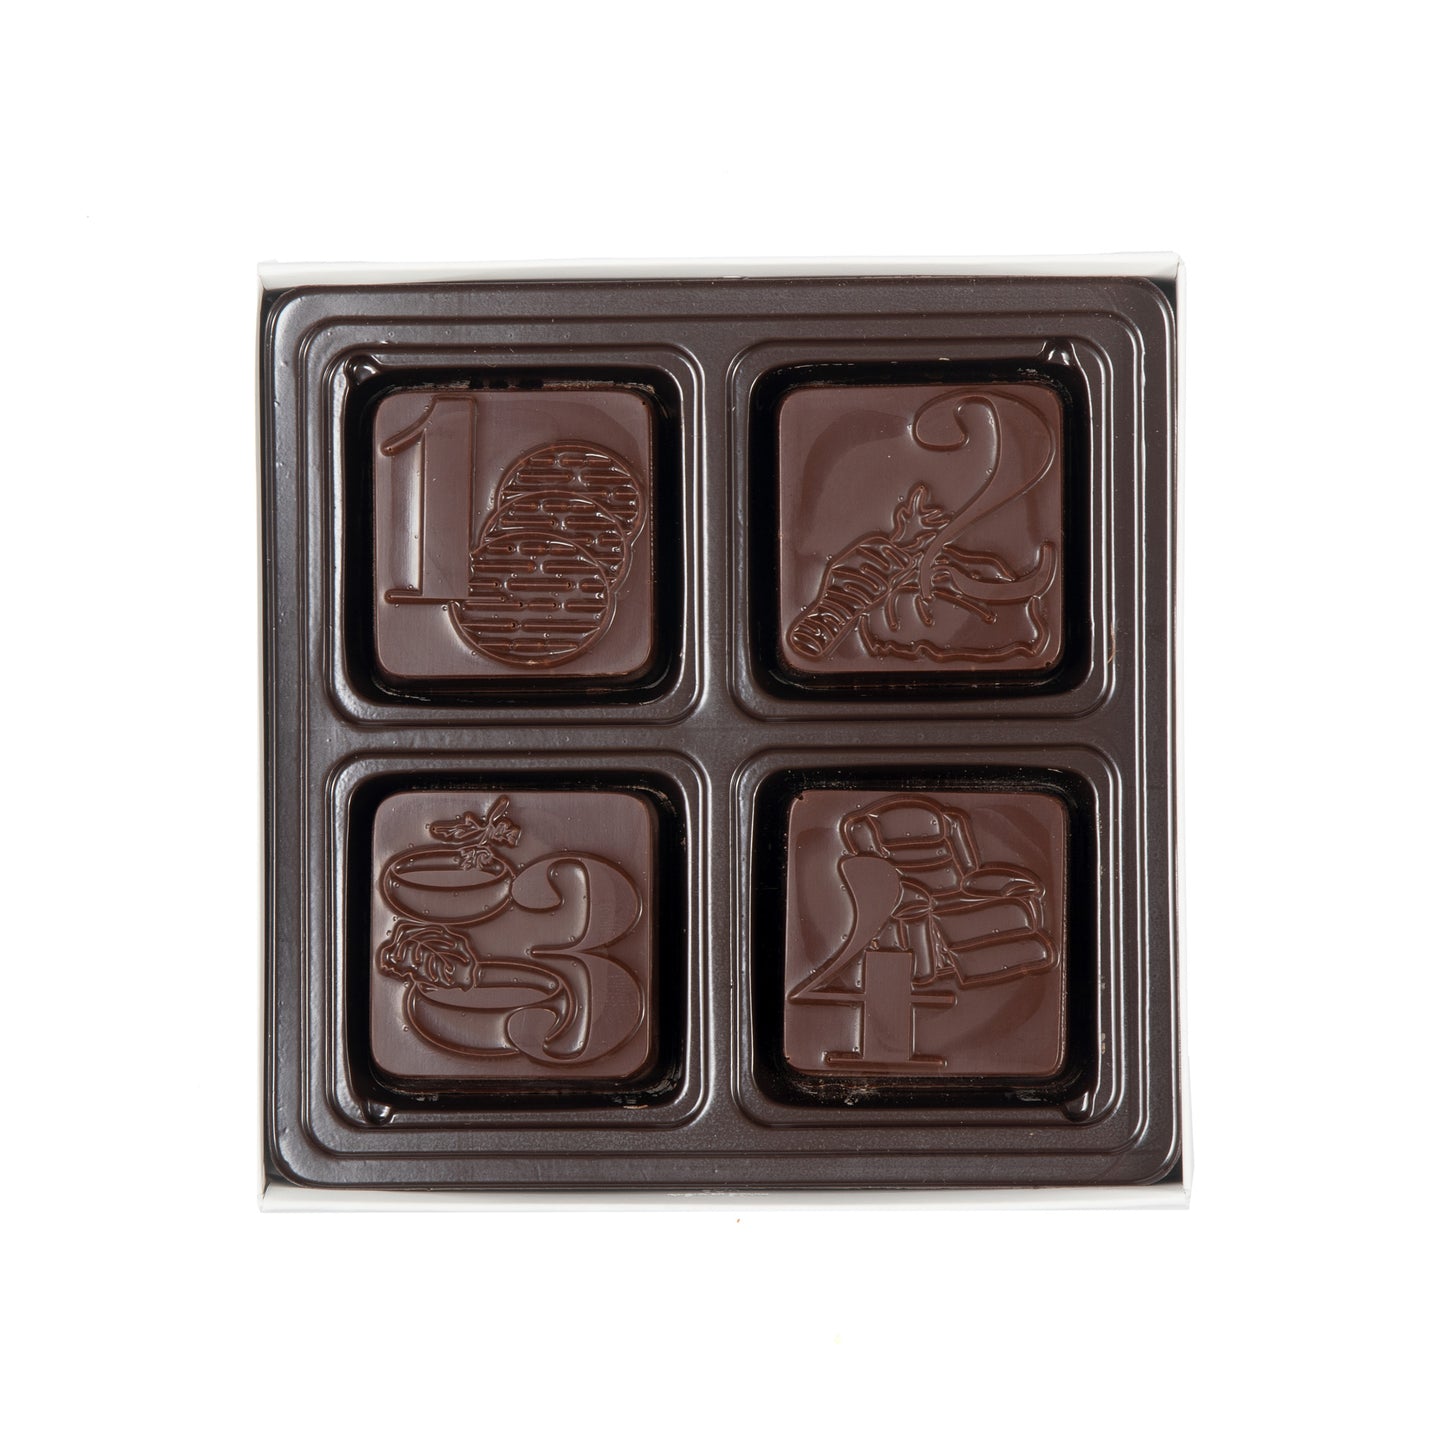 The Four Chocolate Questions | Kosher for Passover